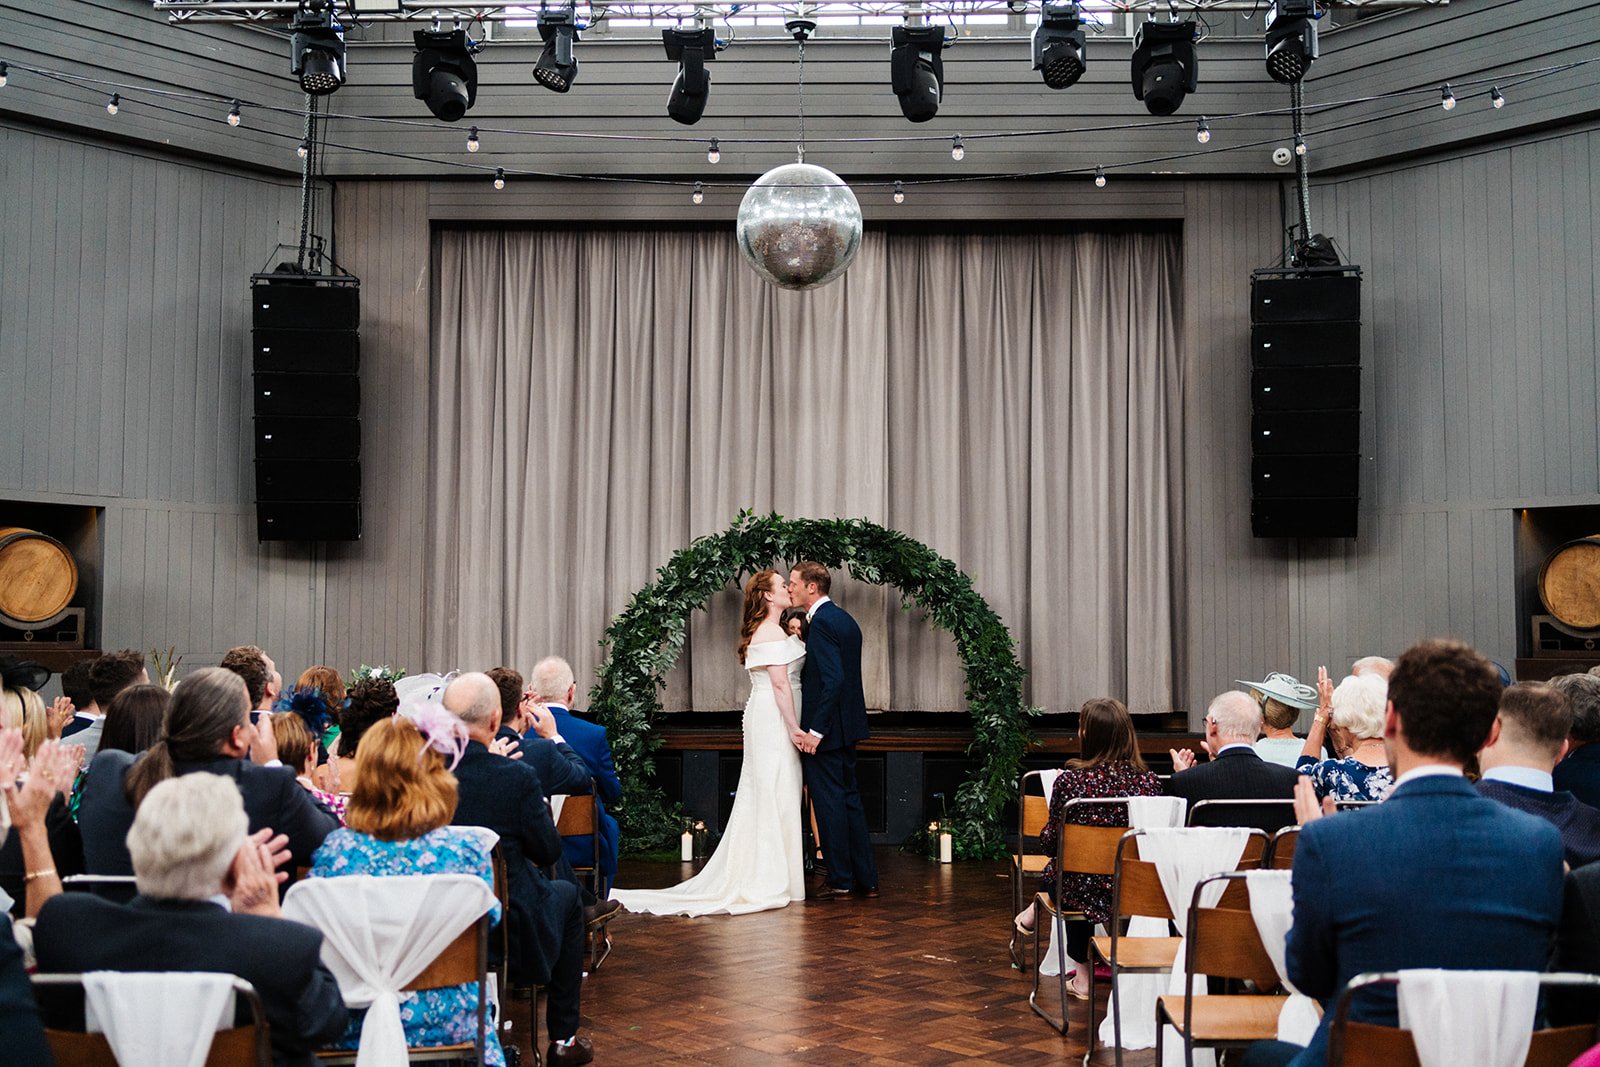 A bride and groom kiss during the ceremony under a botanical arch and a mirror ball at Wylam Brewery in Newcastle. North-east wedding photography